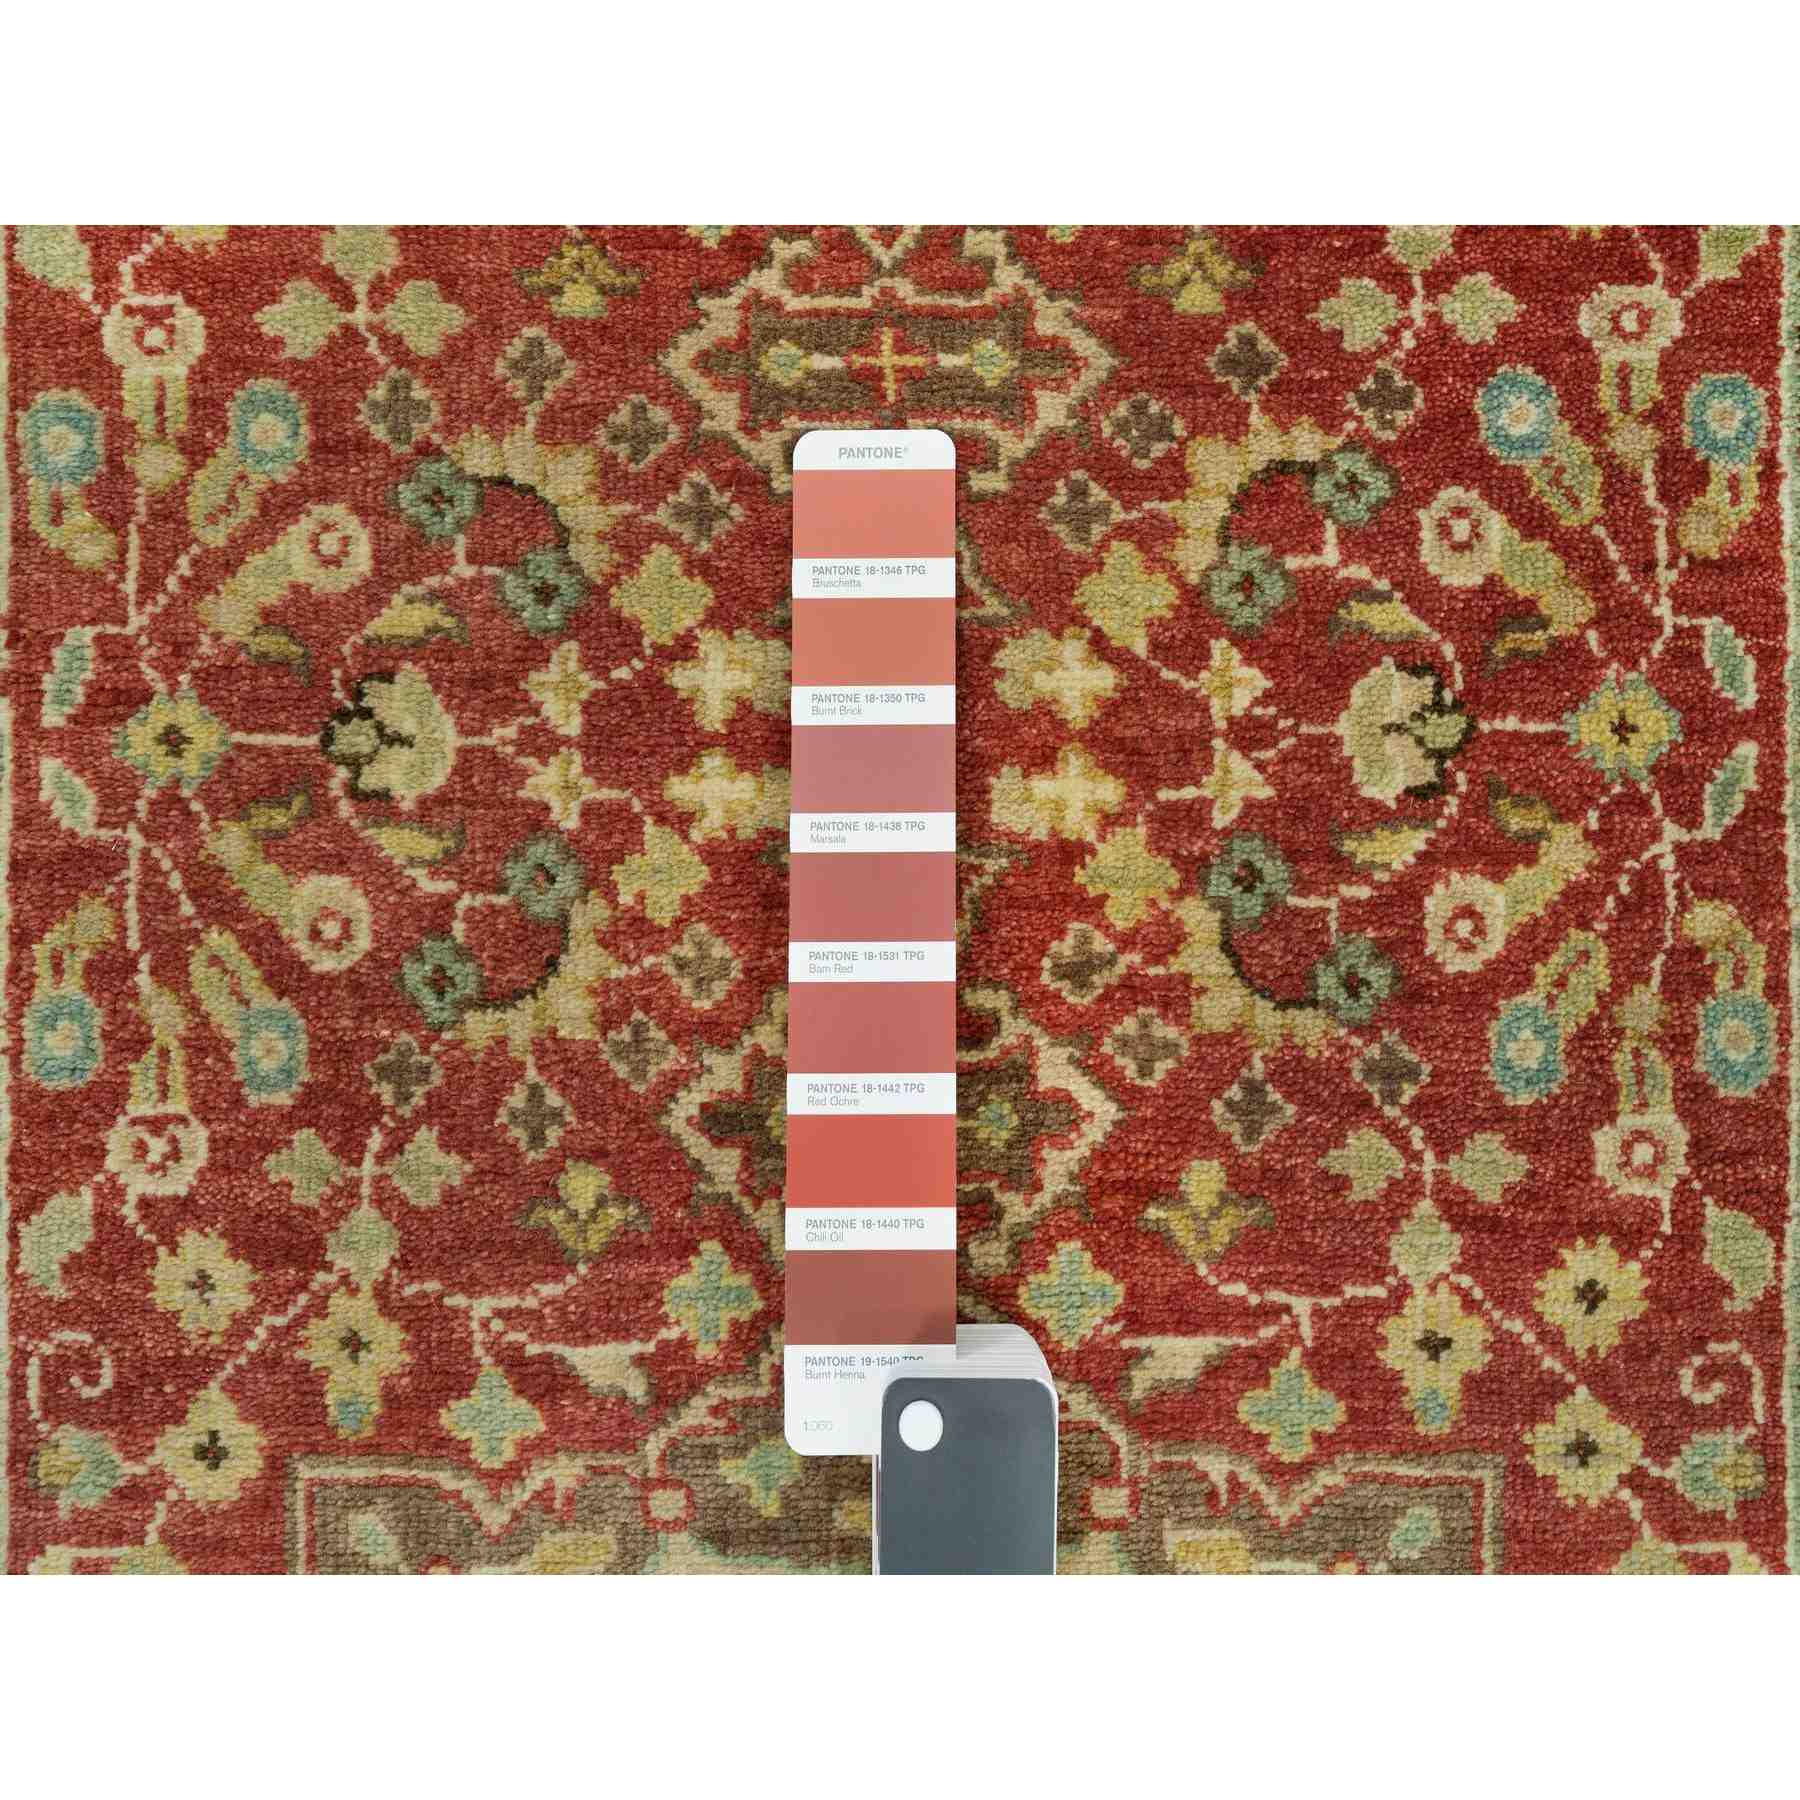 Fine-Oriental-Hand-Knotted-Rug-450535